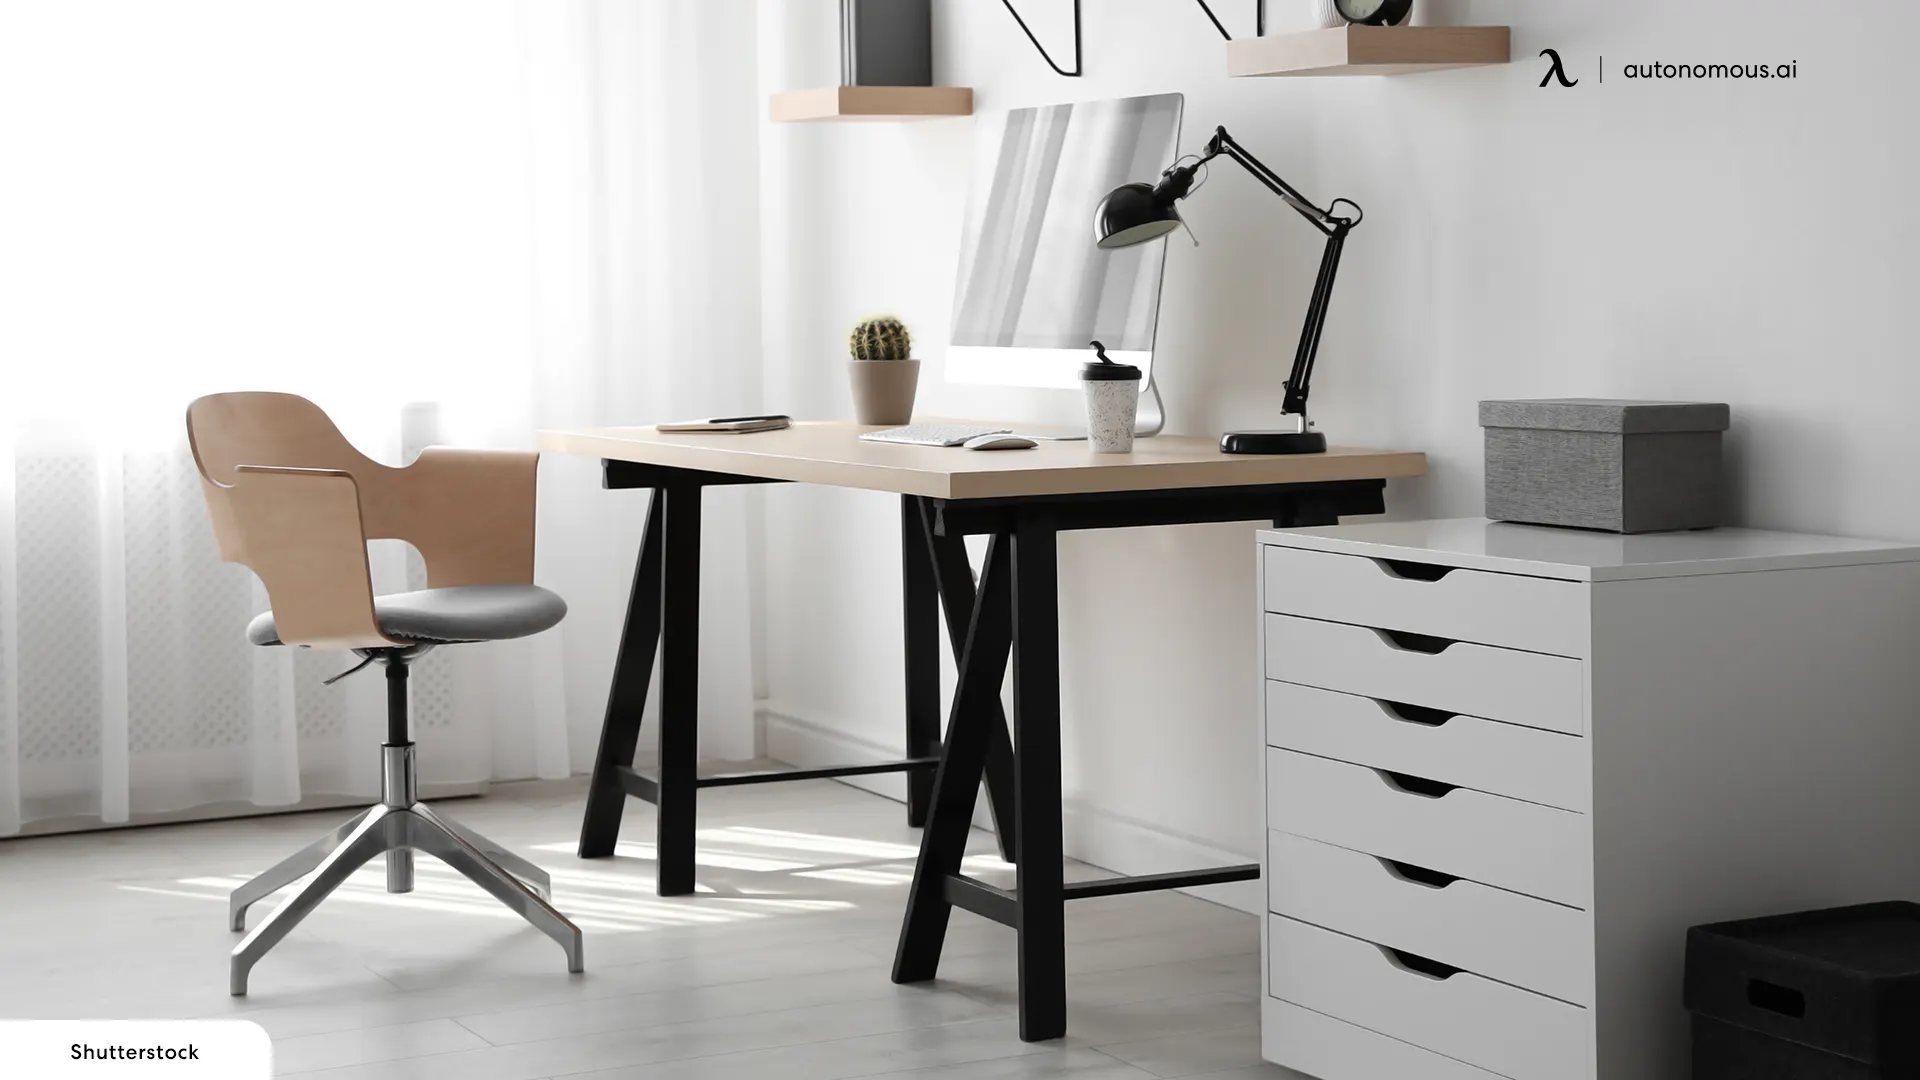 Desk Chairs Without Wheels: Pros and Cons